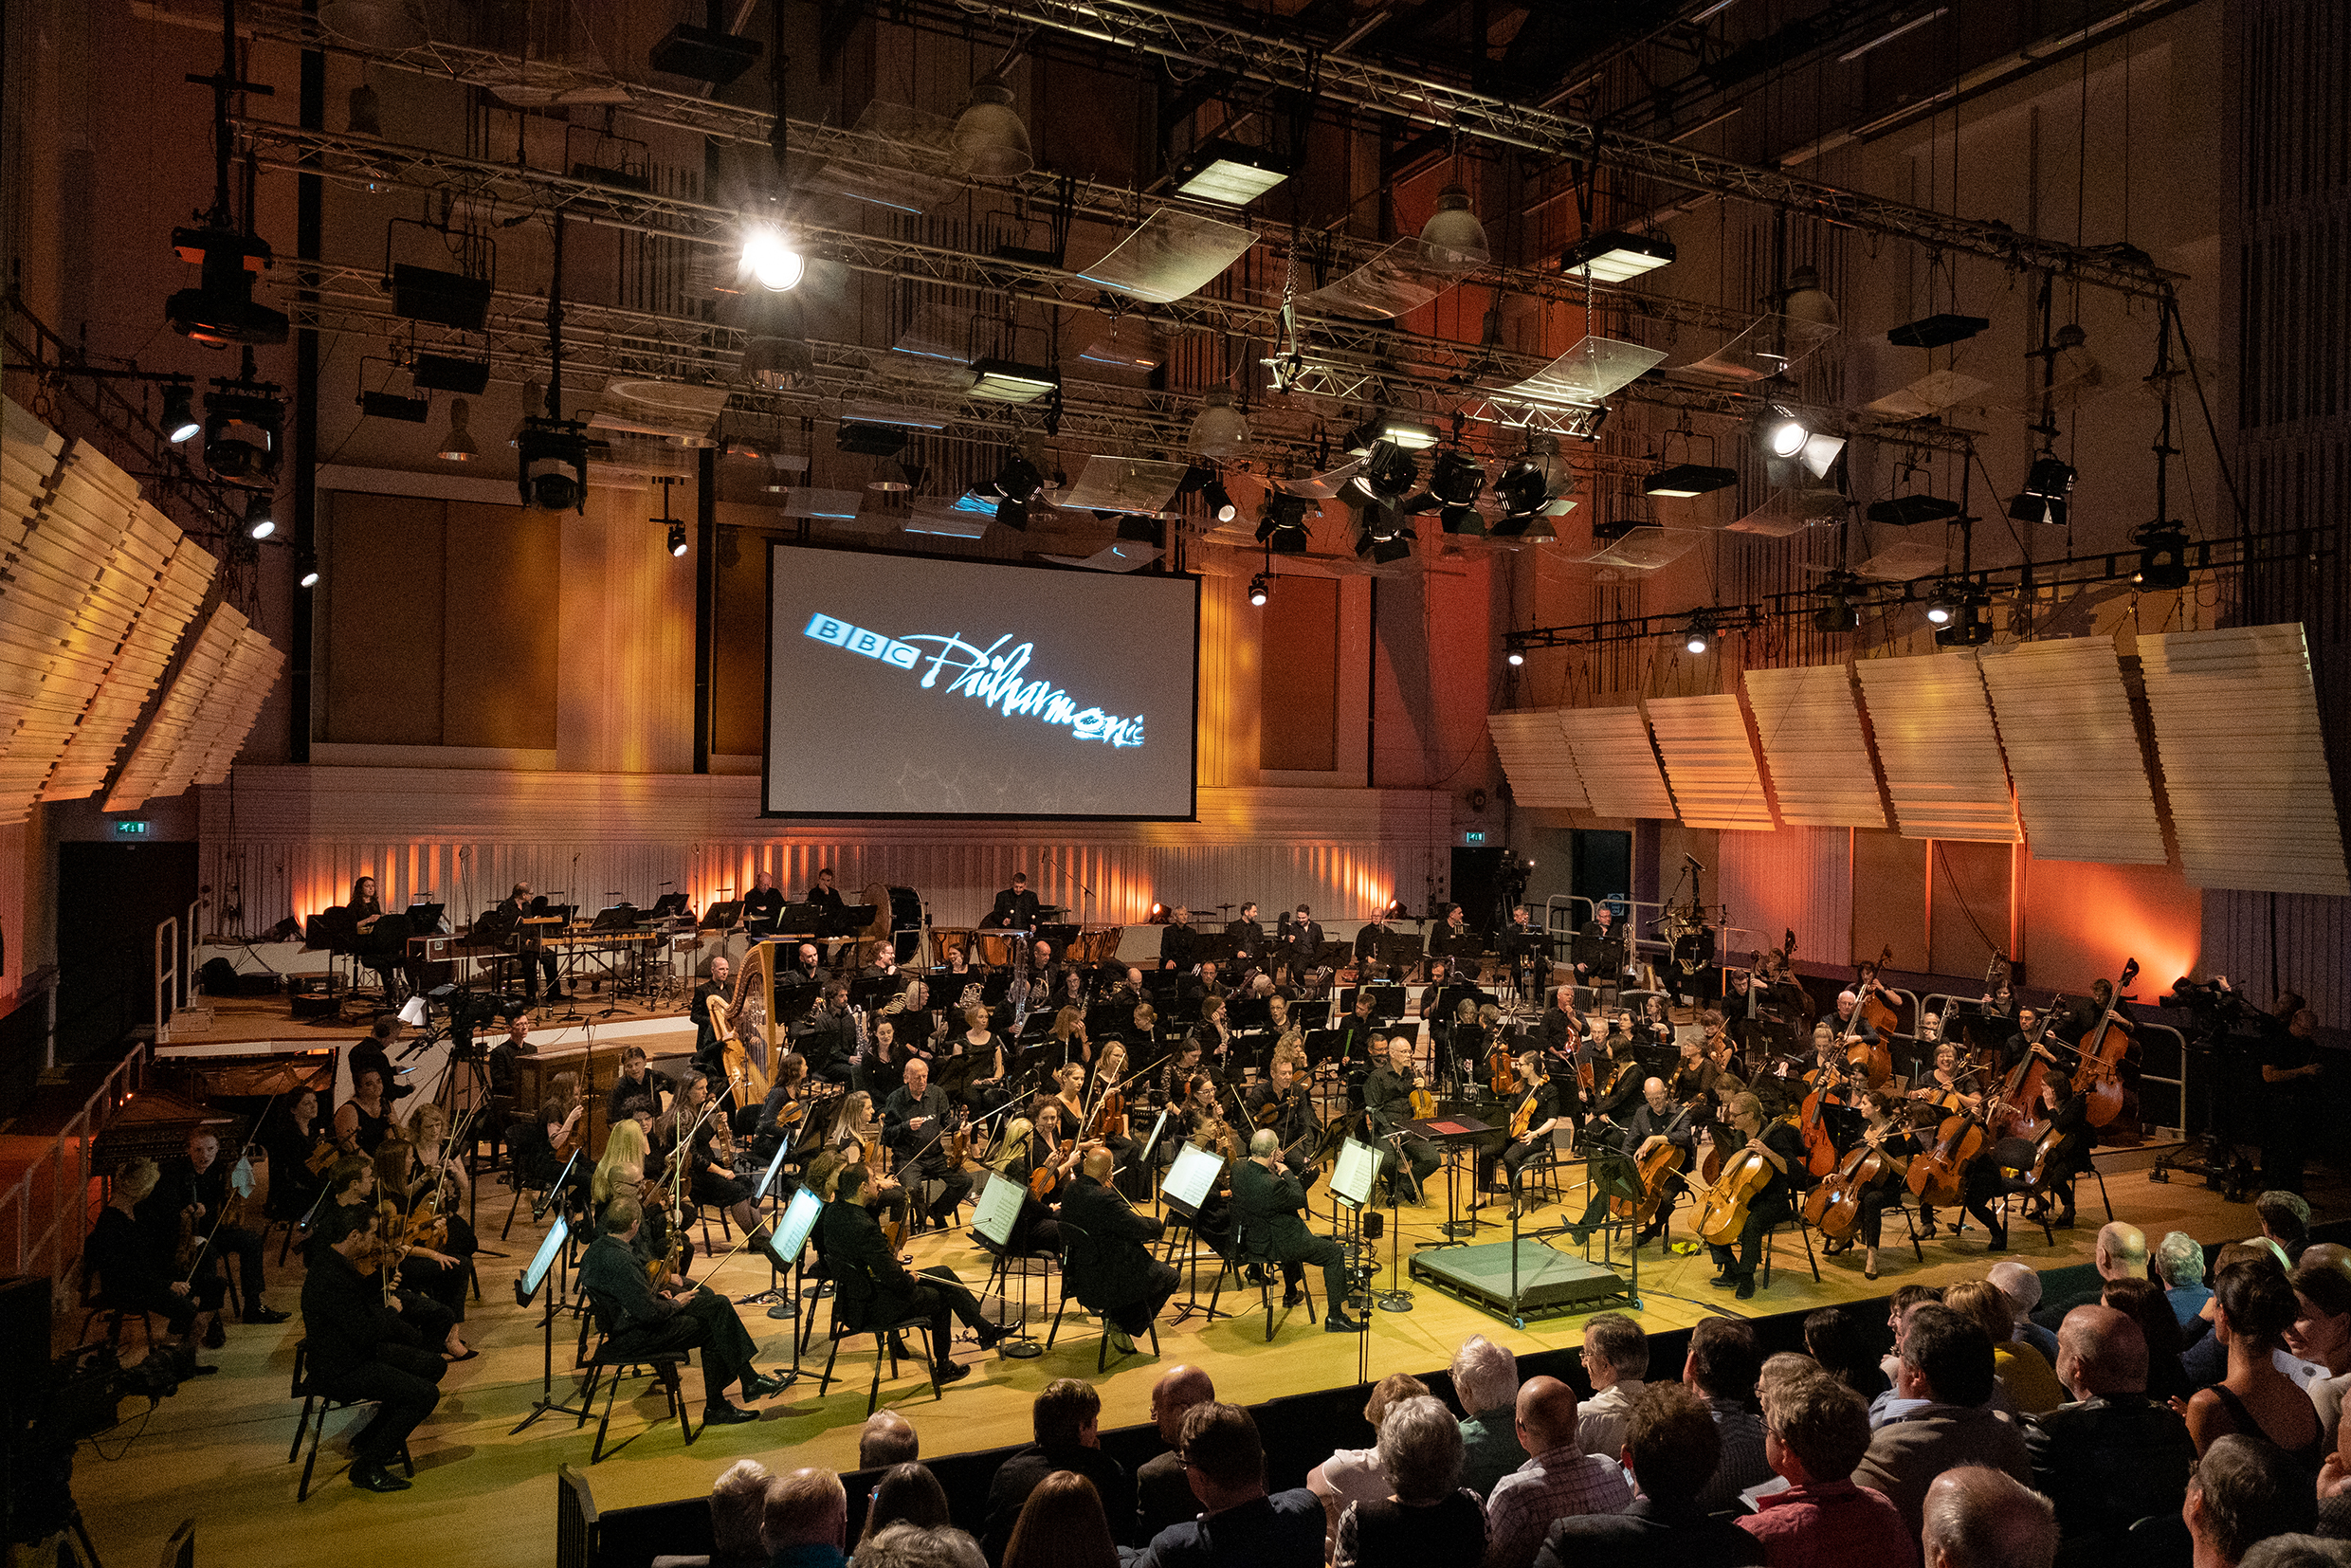 BBC Philharmonic perfoming indoors with red lighting